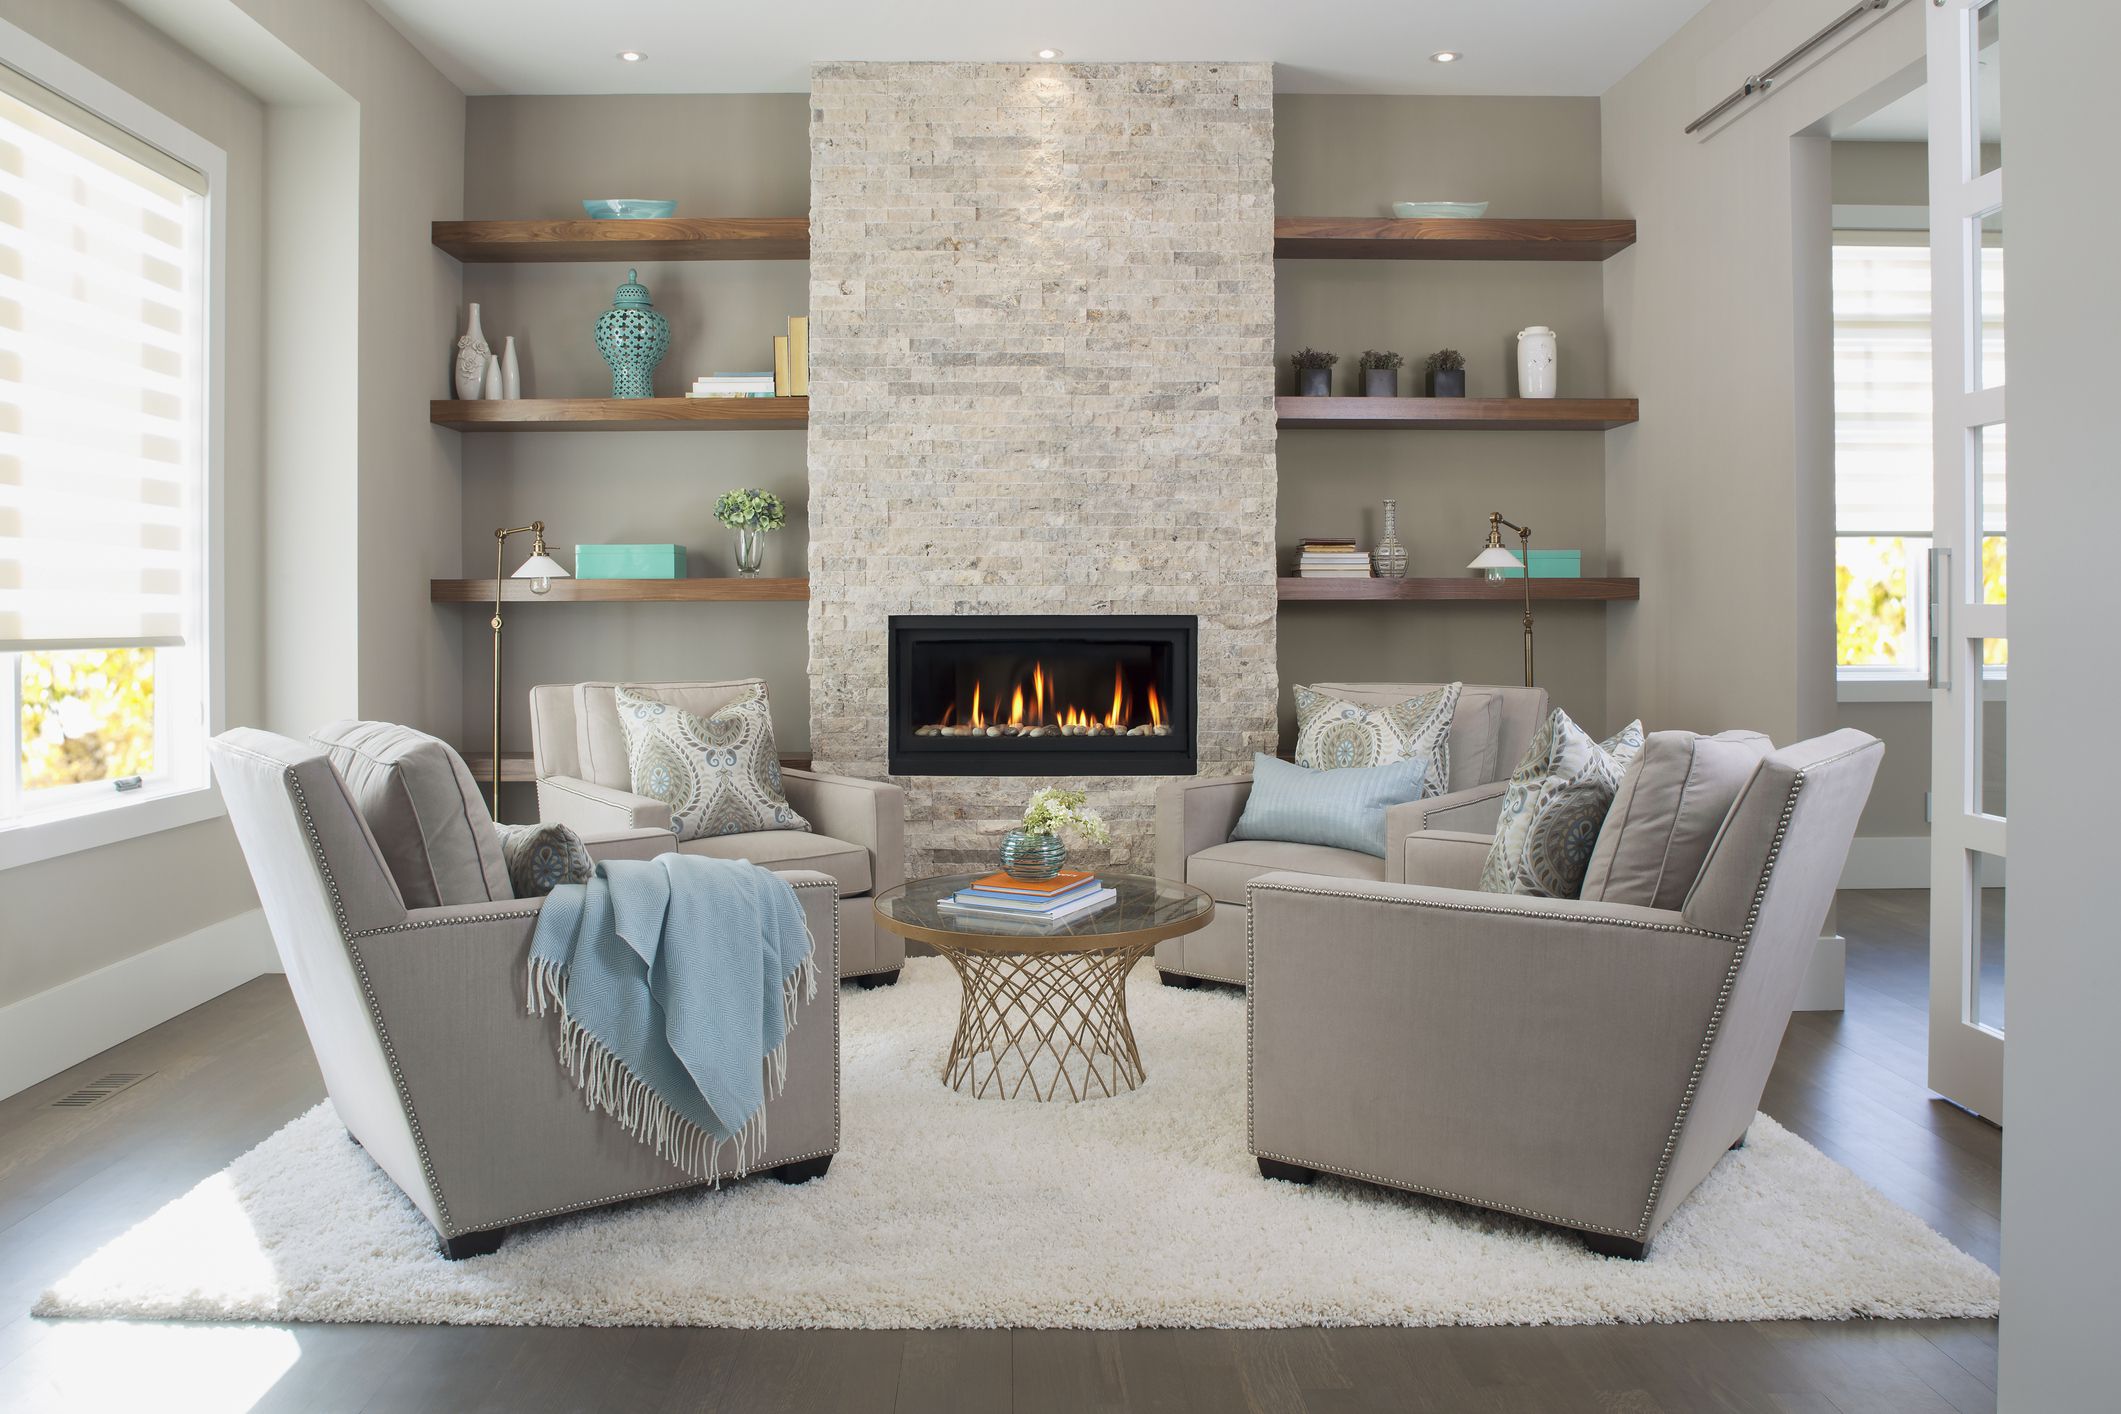 What living room set furniture do you get to make the fireplace the focal point of the room?